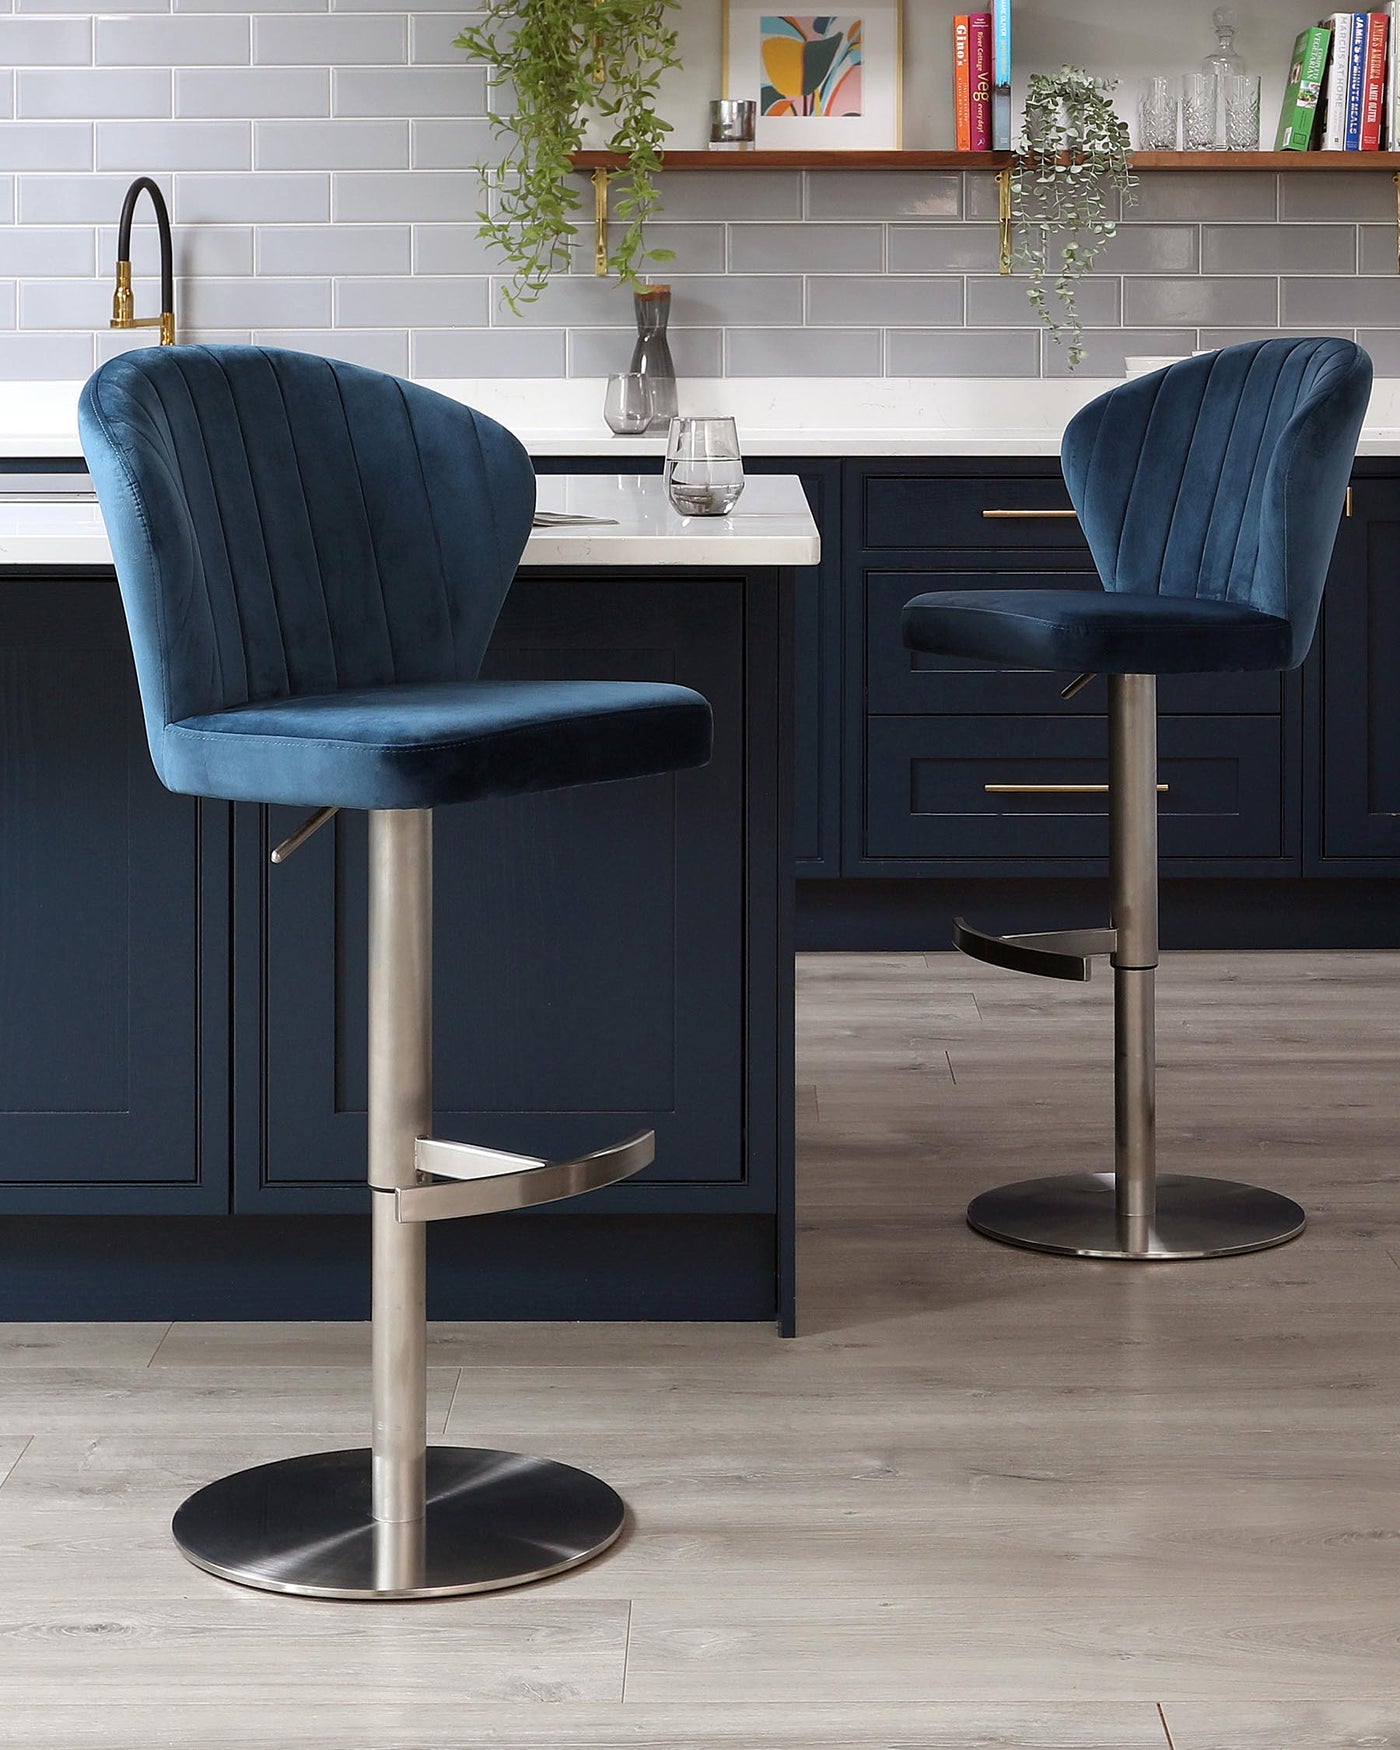 Two elegant contemporary-style bar stools with plush deep blue velvet upholstery and a vertical channel tufted backrest. The stools have an adjustable height mechanism, a circular chrome base, and a built-in footrest for added comfort.